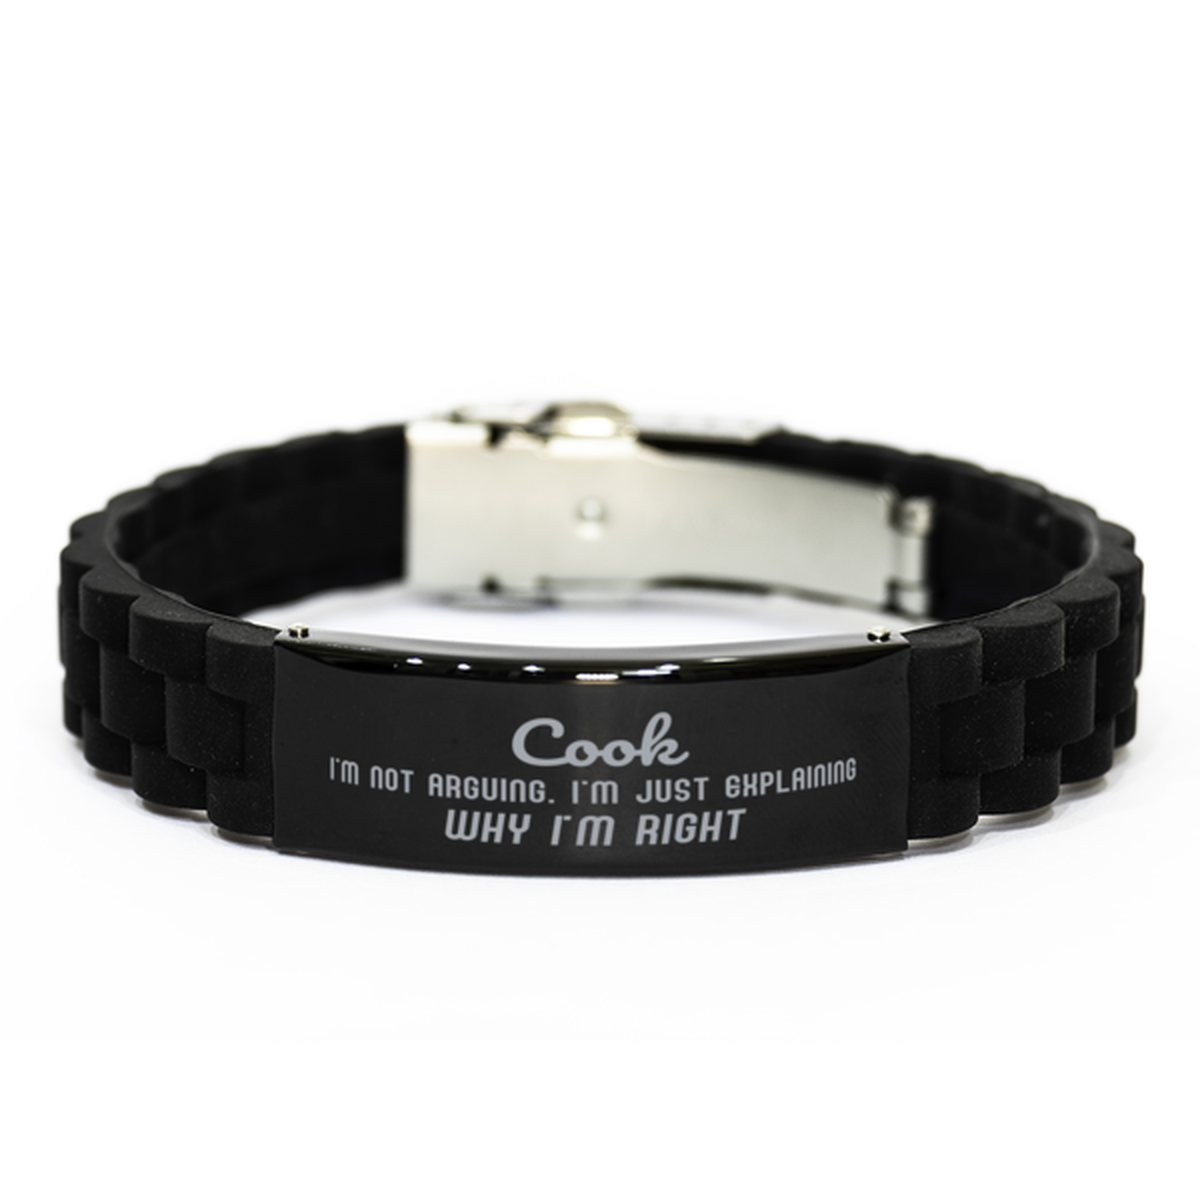 Cook I'm not Arguing. I'm Just Explaining Why I'm RIGHT Black Glidelock Clasp Bracelet, Funny Saying Quote Cook Gifts For Cook Graduation Birthday Christmas Gifts for Men Women Coworker